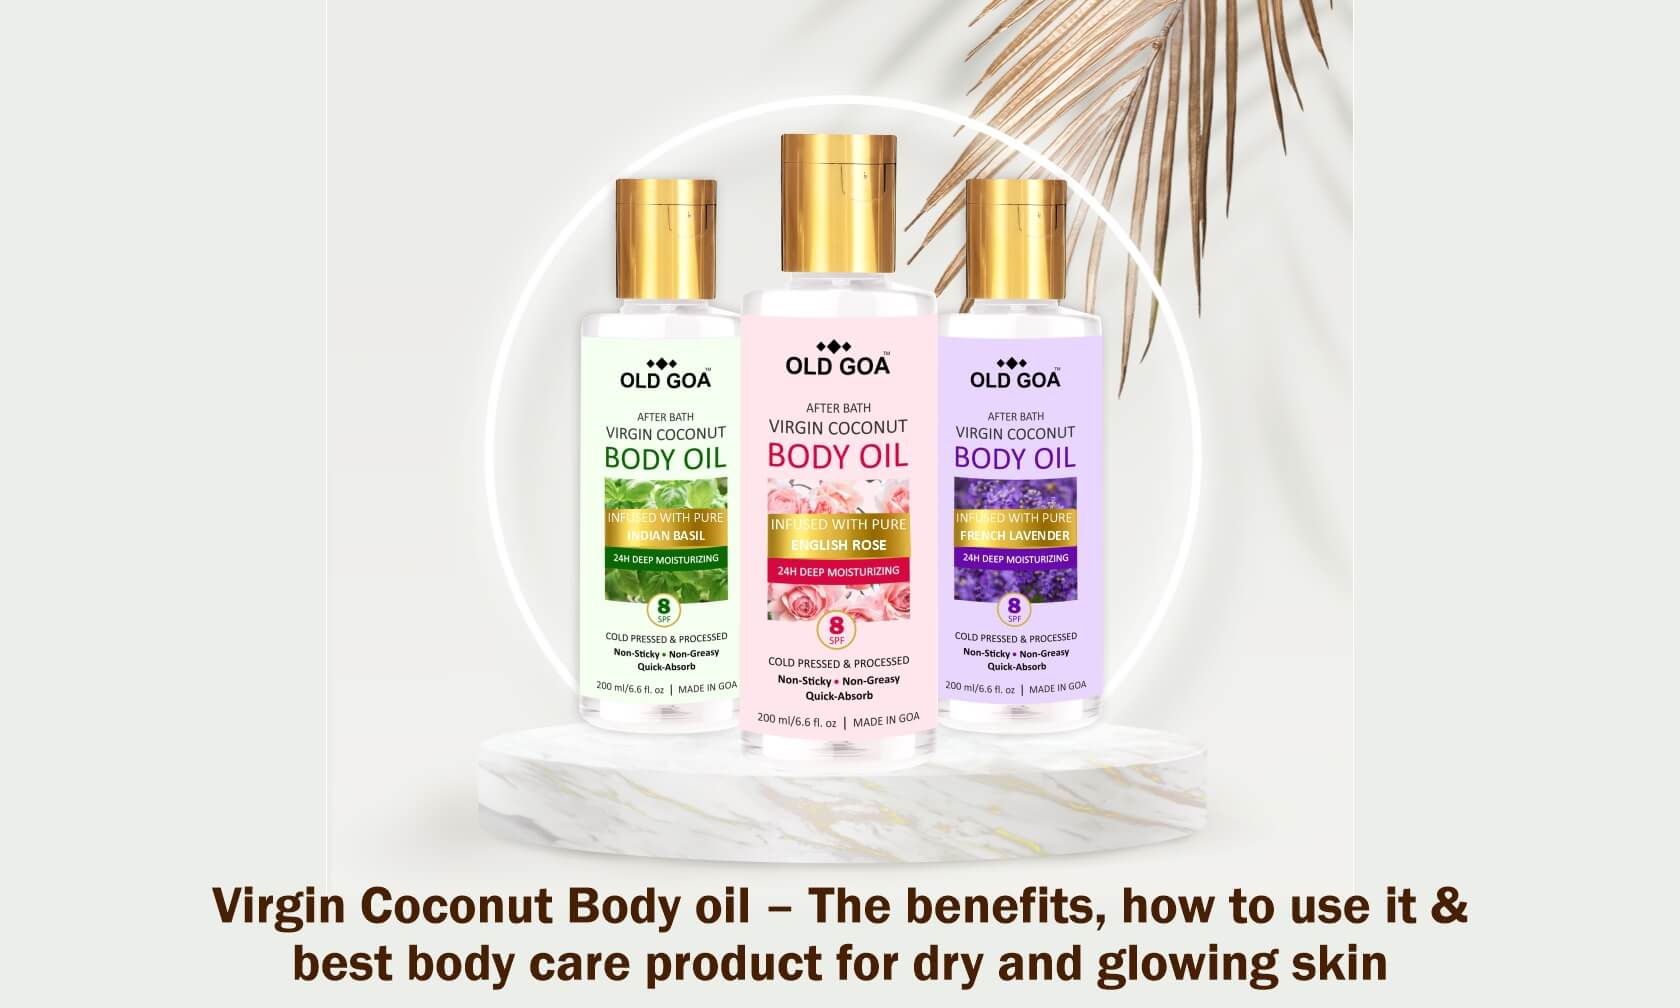 Virgin Coconut Body oil – The benefits, how to use it & best body care product for dry and glowing skin